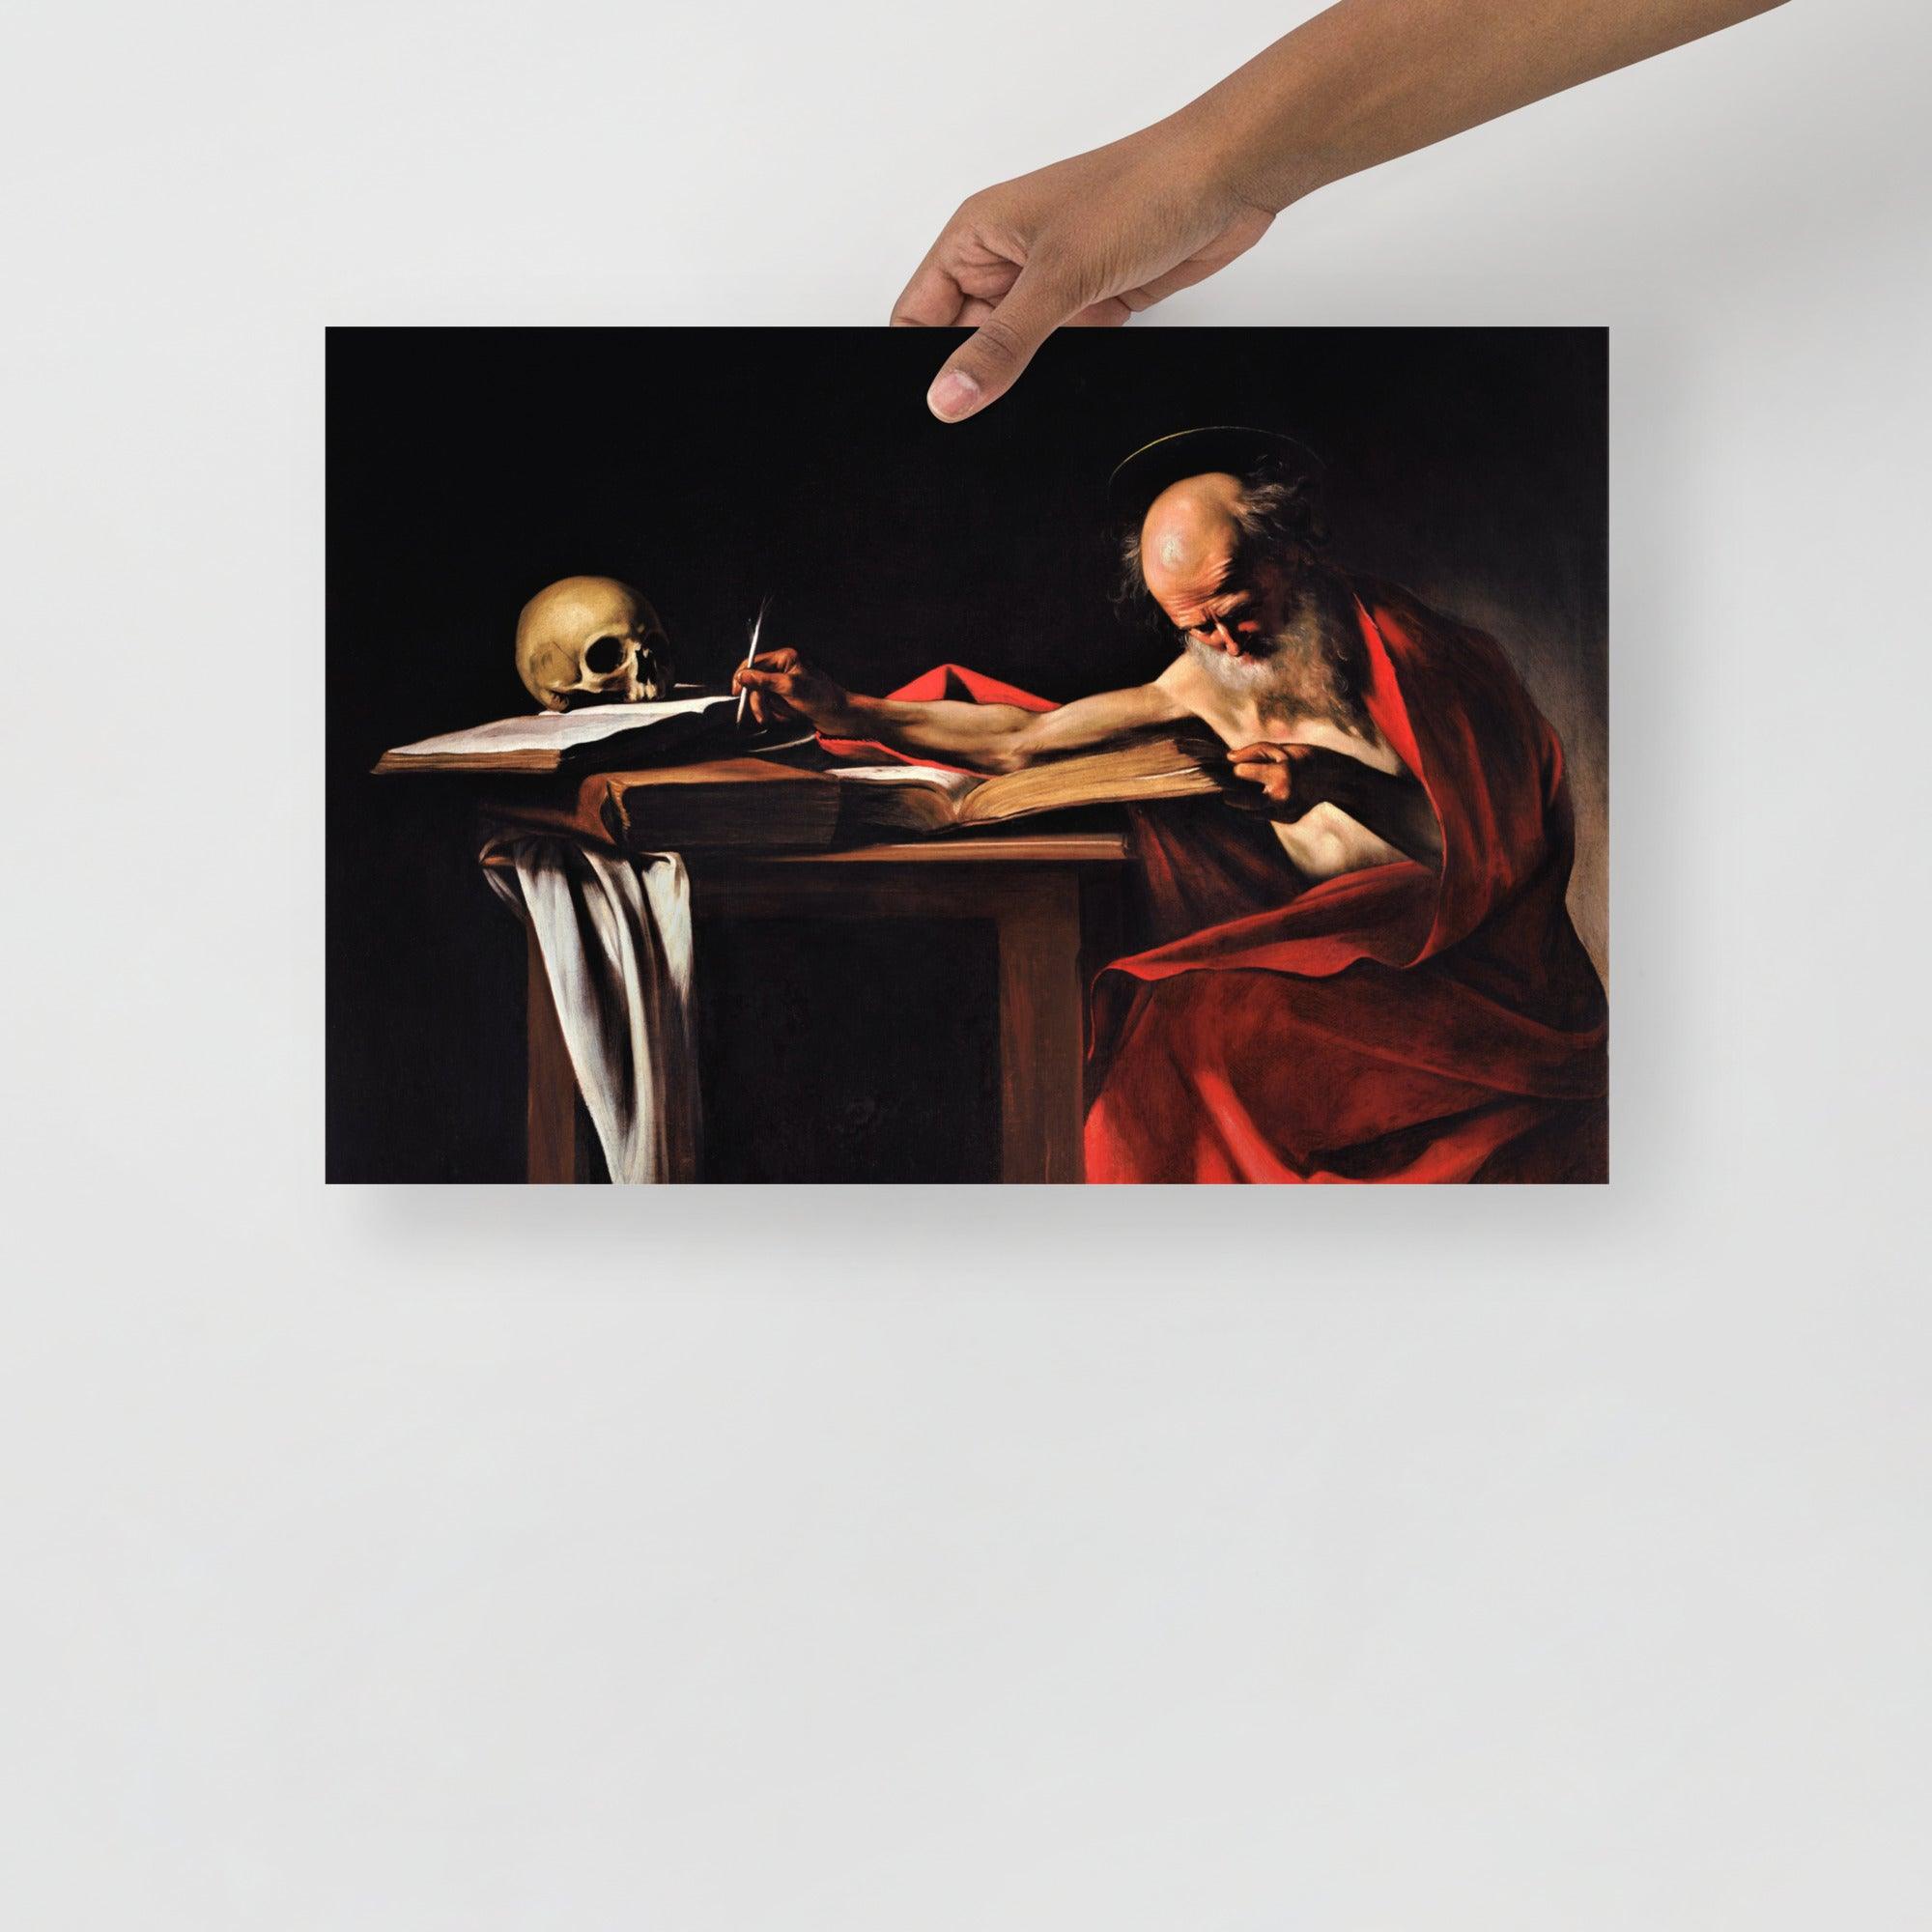 A Saint Jerome Writing by Caravaggio poster on a plain backdrop in size 12x18”.